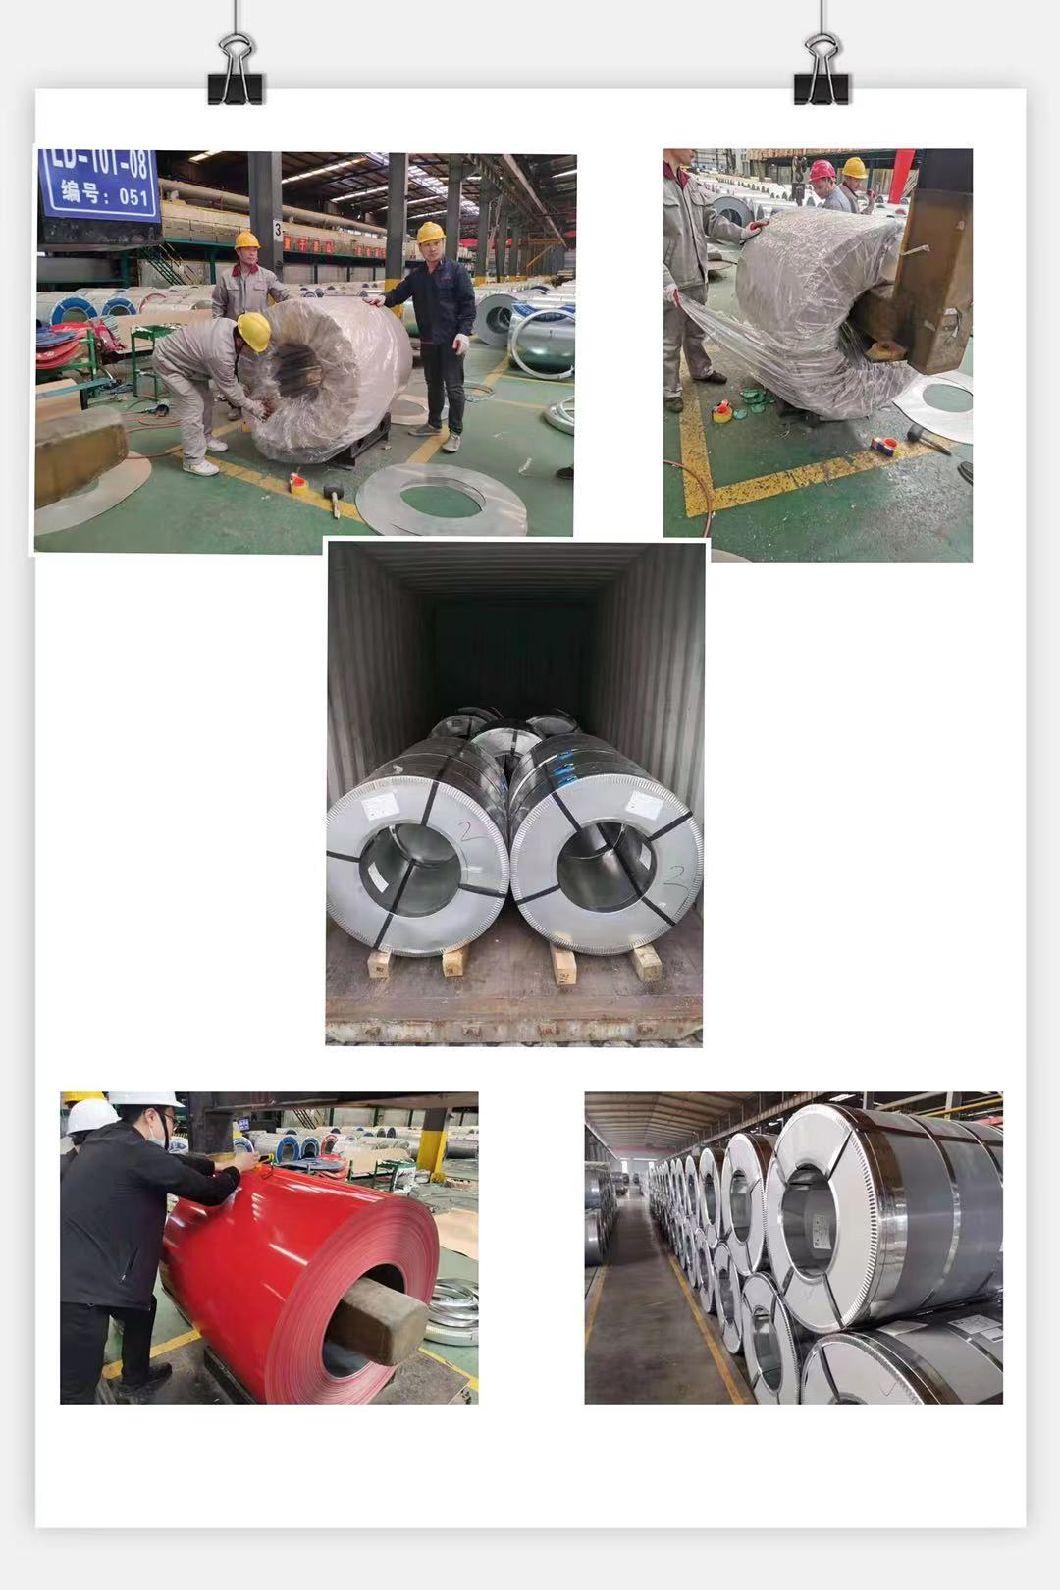 Electro Galvanized Steel Sheets/Eg/Egi Coil/Hot Dipped Galvanized Steel Coil From China